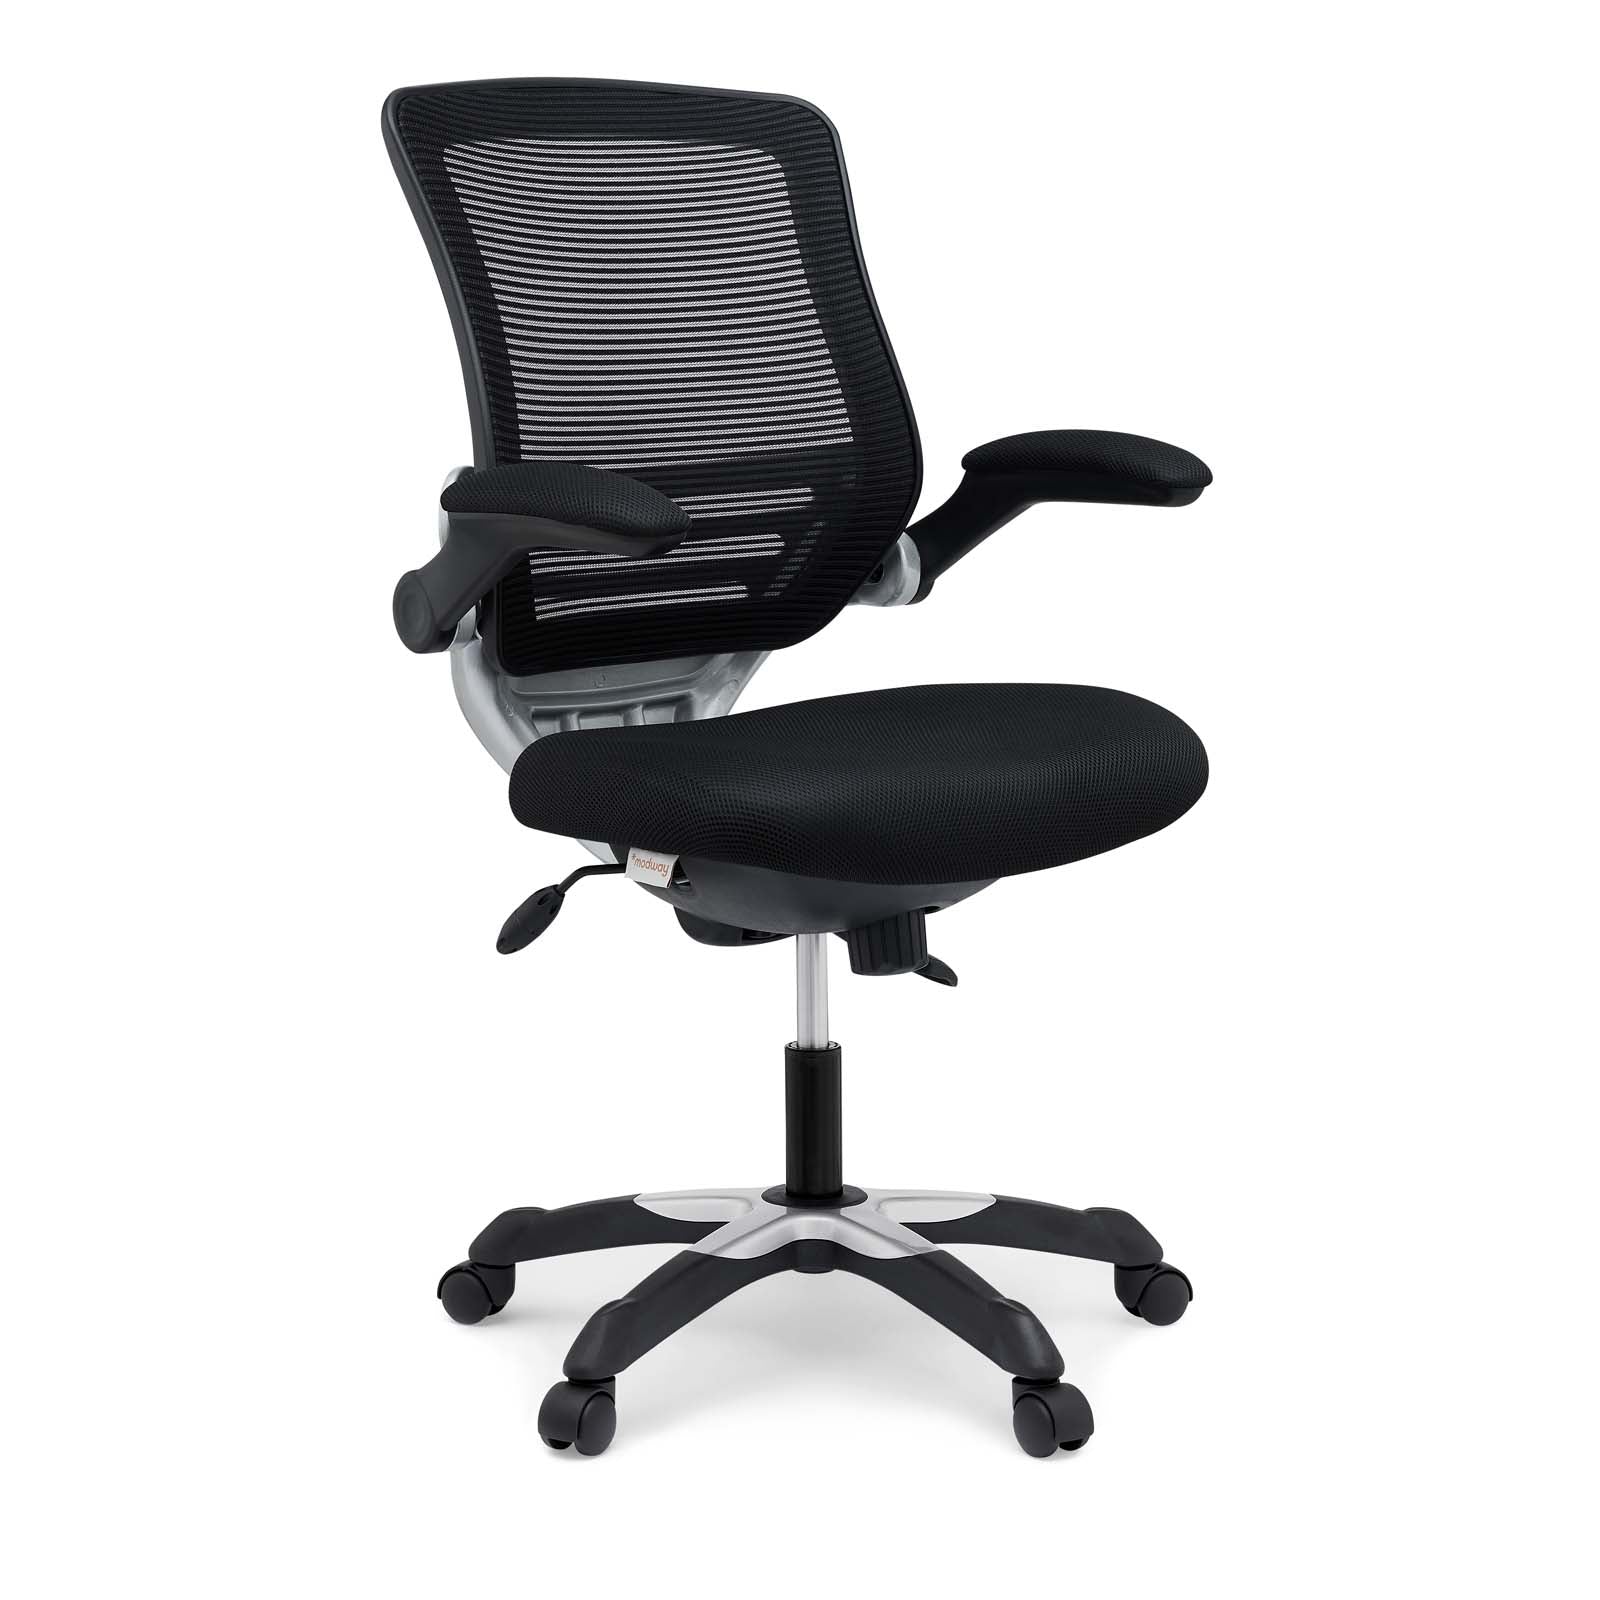 Buy Multicolored Edge Mesh Office Chair at BUILDMyplace